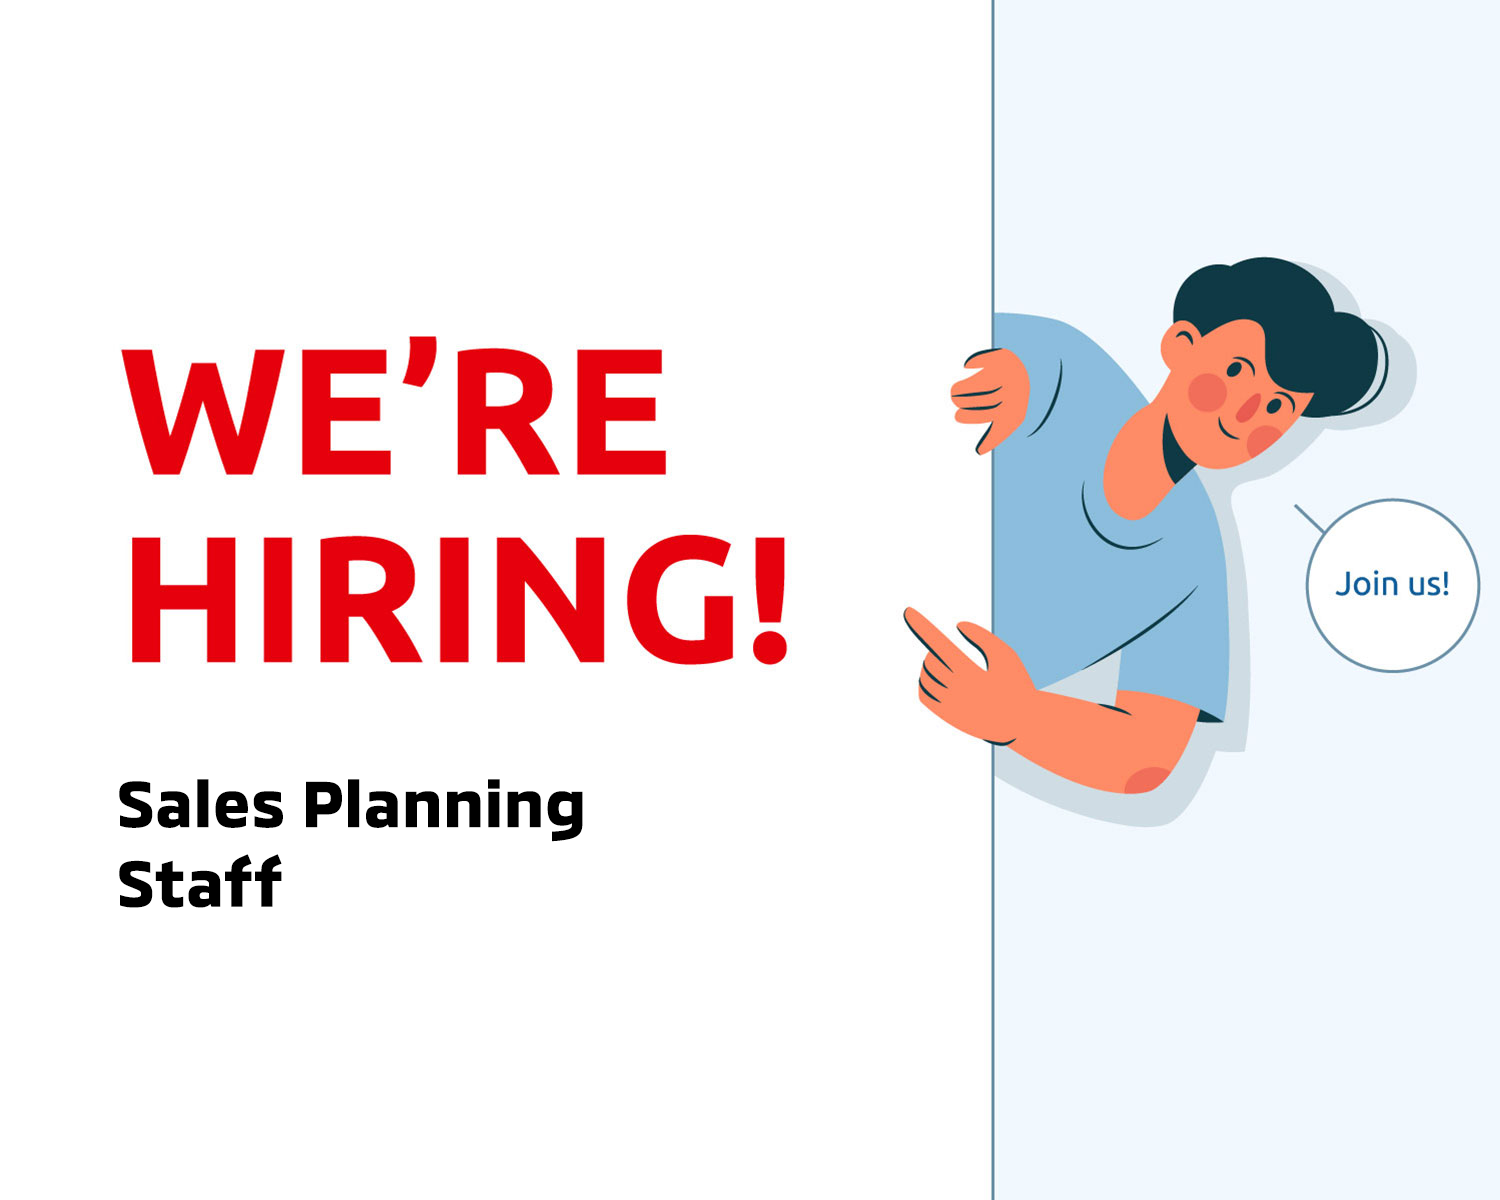 TUYỂN DỤNG: SALES PLANNING STAFF